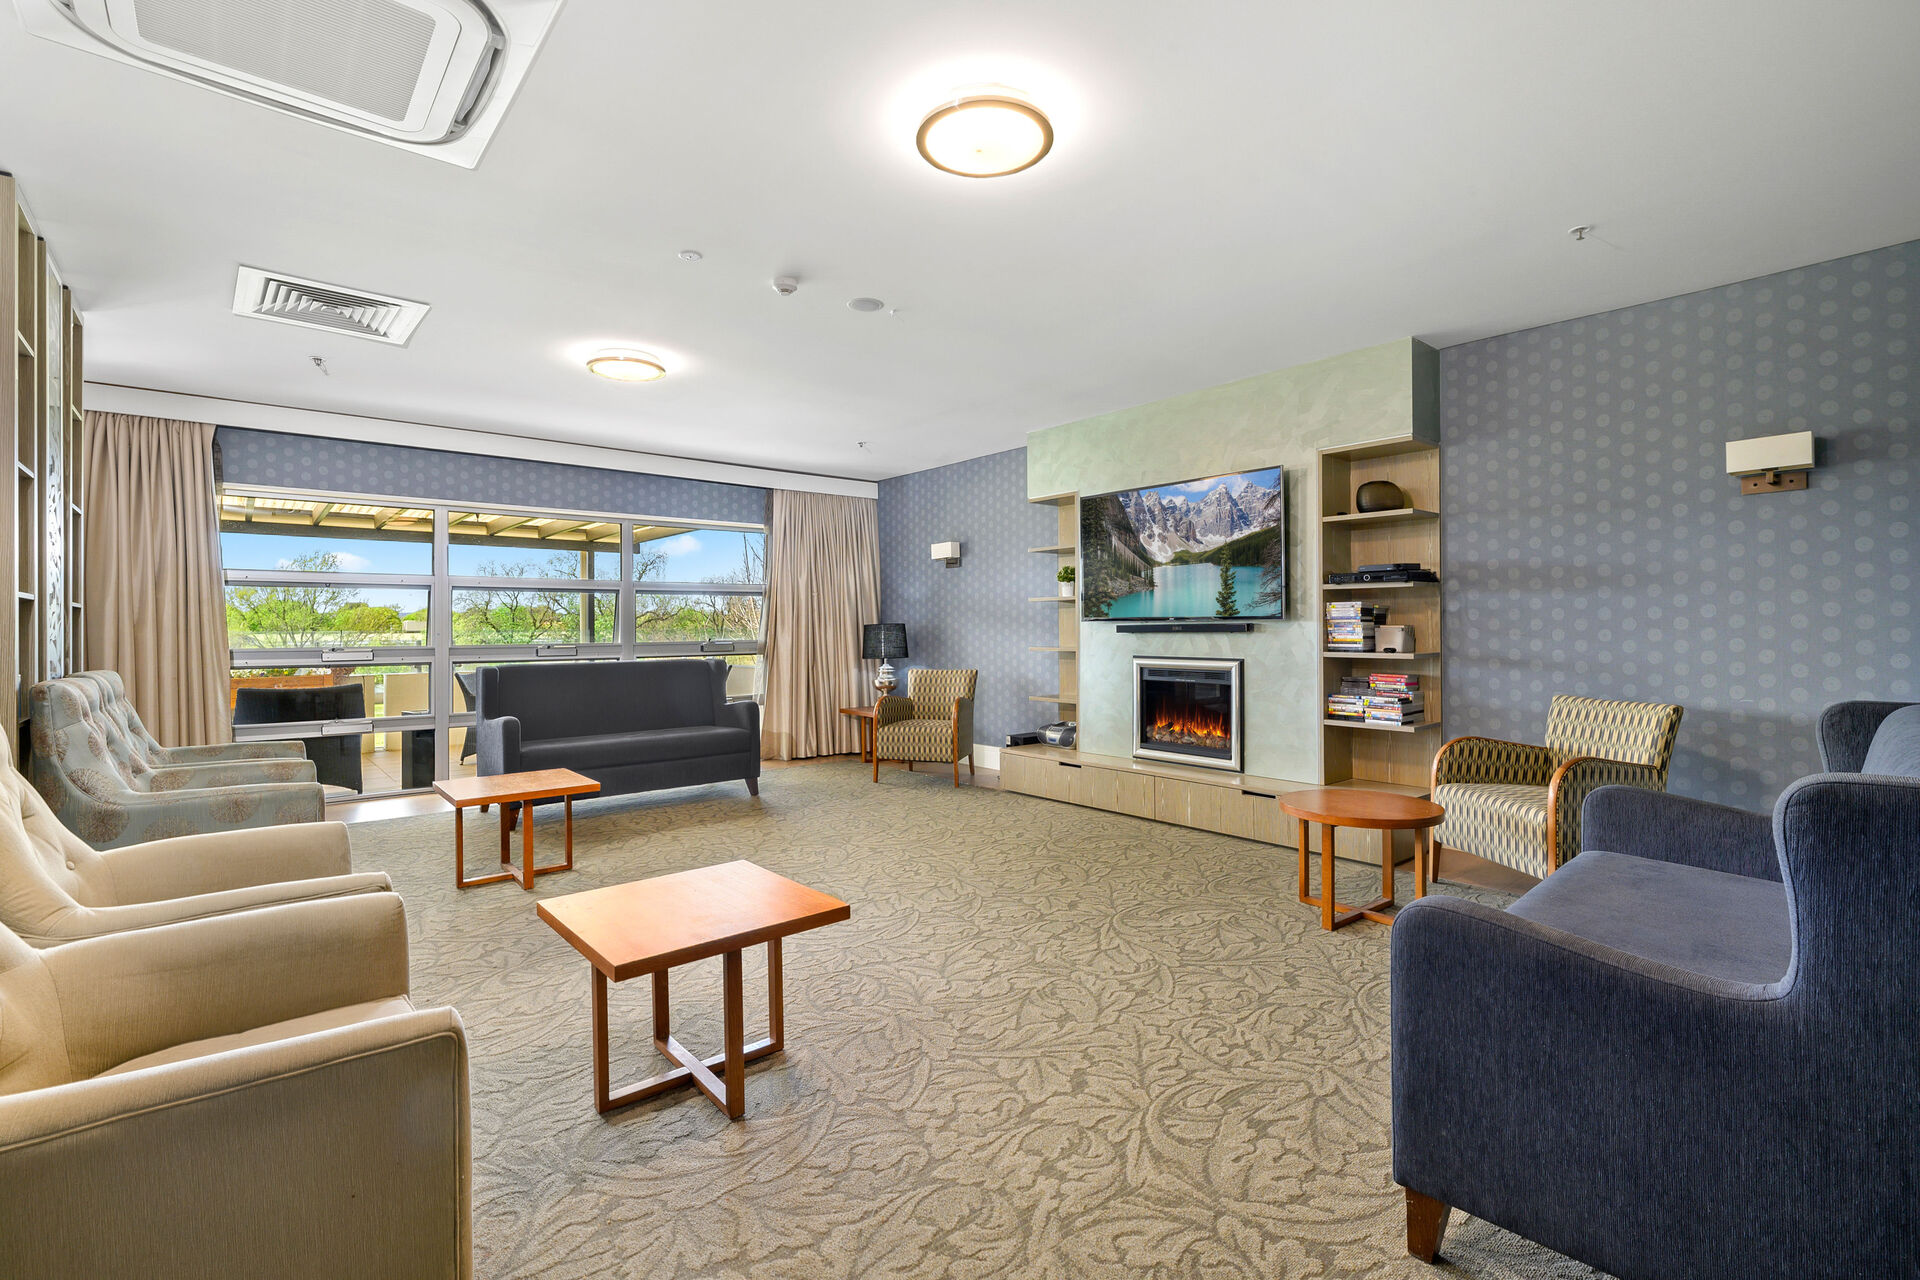 lounge room with fireplace area for nursing home residents to enjoy at baptistcare griffith residential aged care home